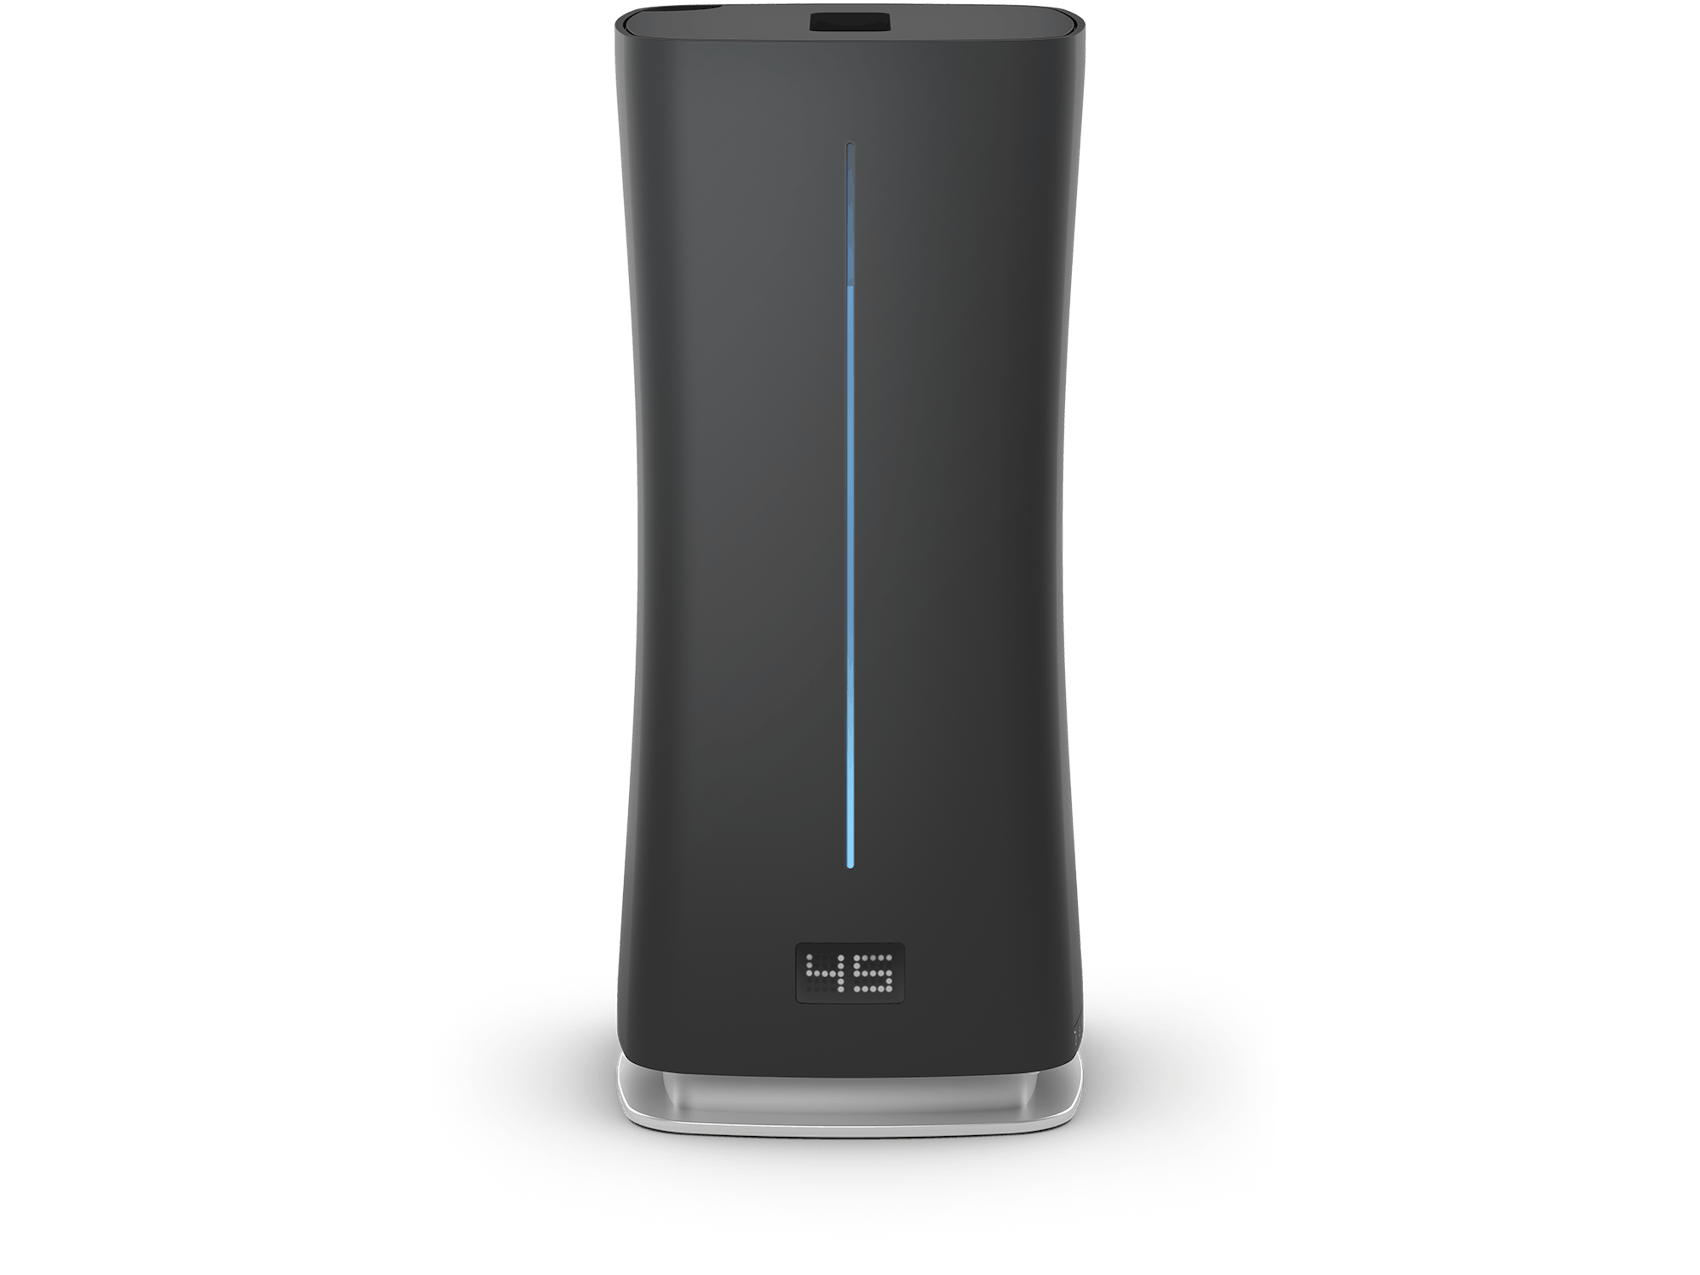 Eva little humidifier by Stadler Form in black as front view